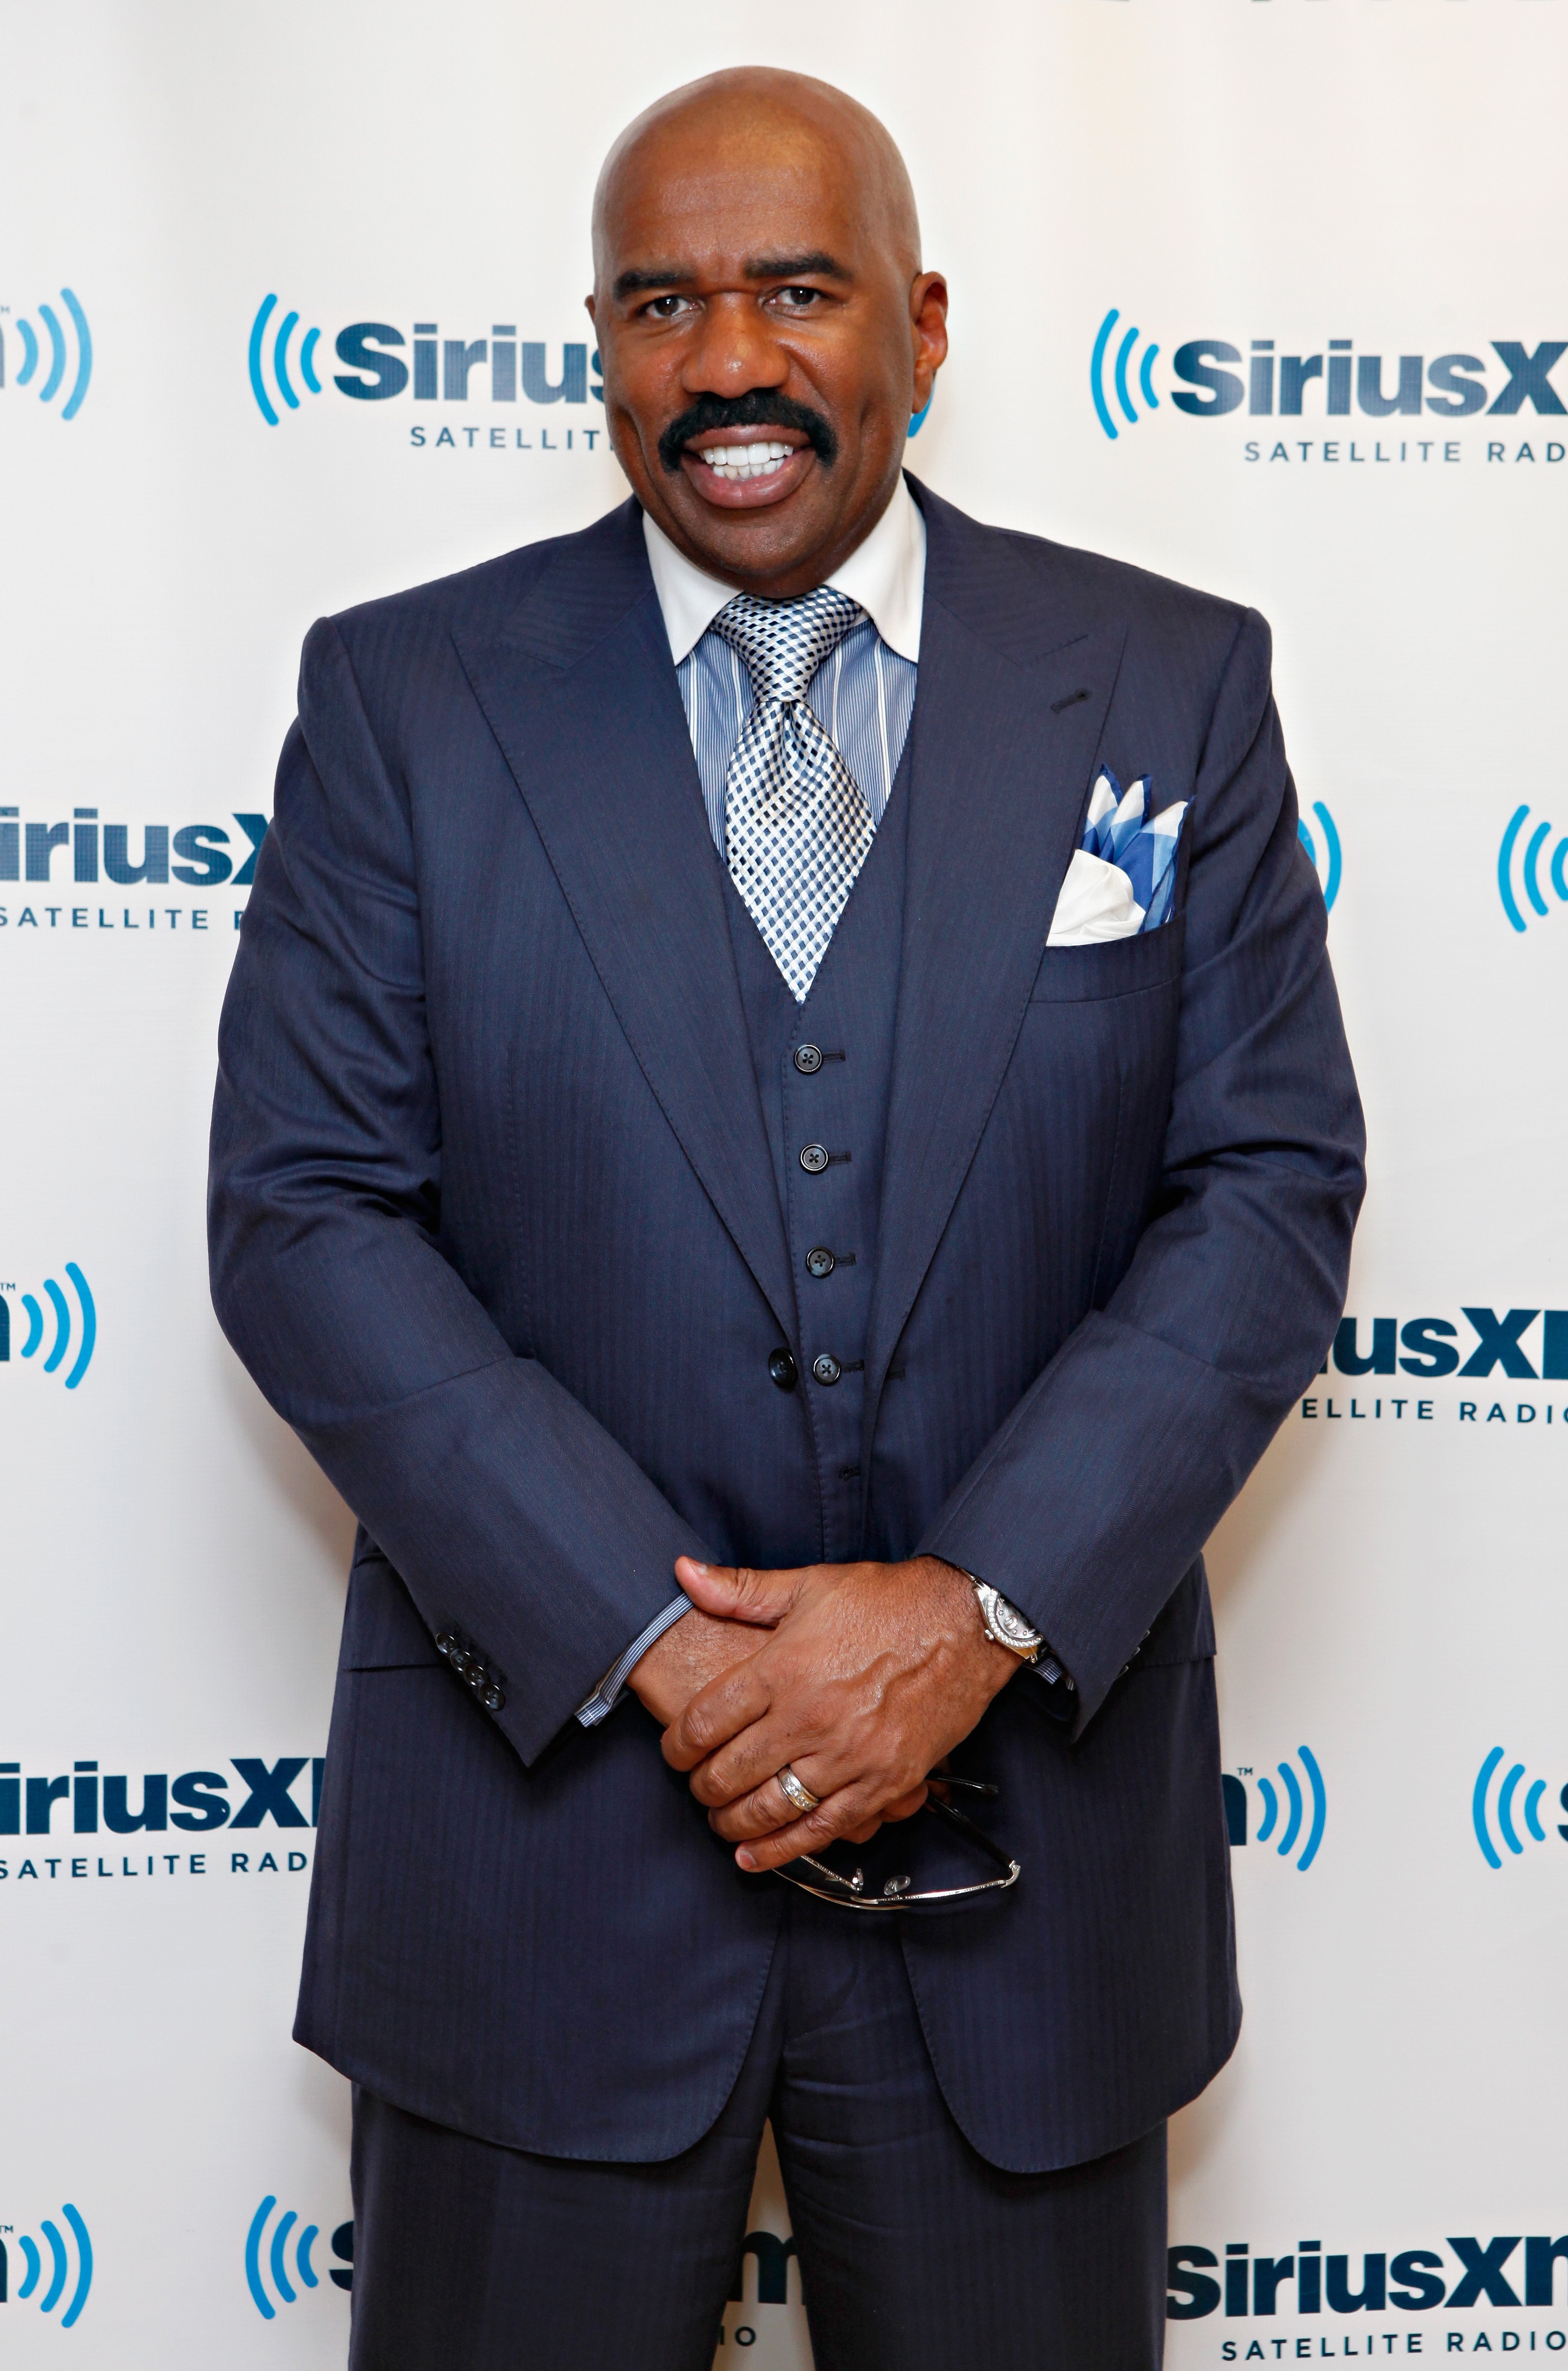 Steve Harvey visits the SiriusXM Studio on August 29, 2012 in New York City | Photo: Getty Images